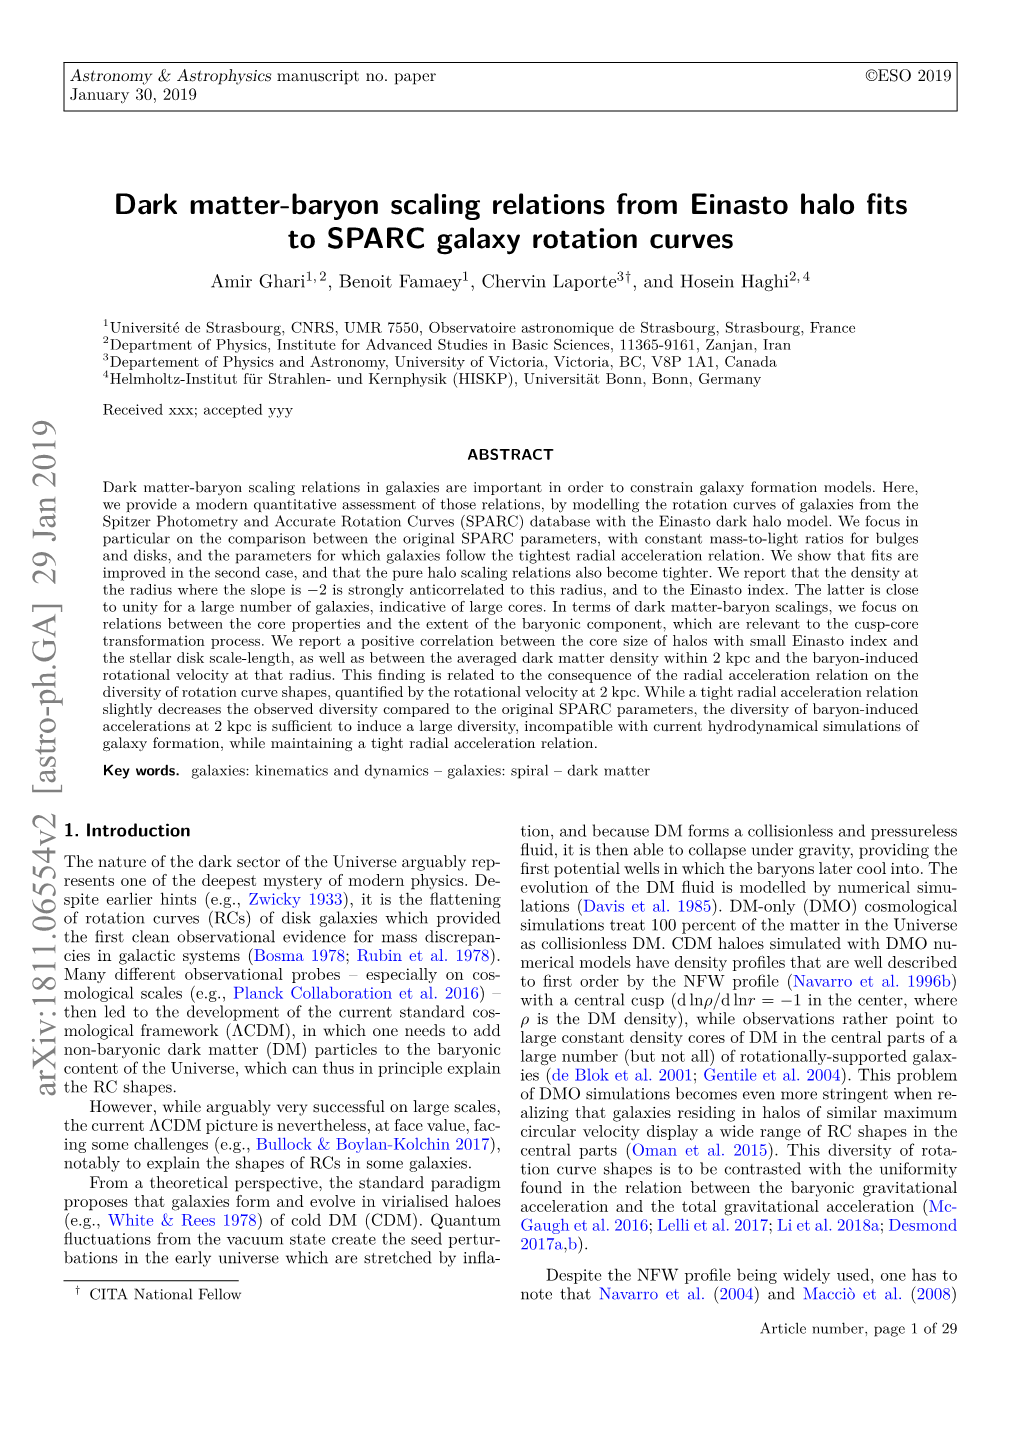 Dark Matter-Baryon Scaling Relations from Einasto Halo Fits To